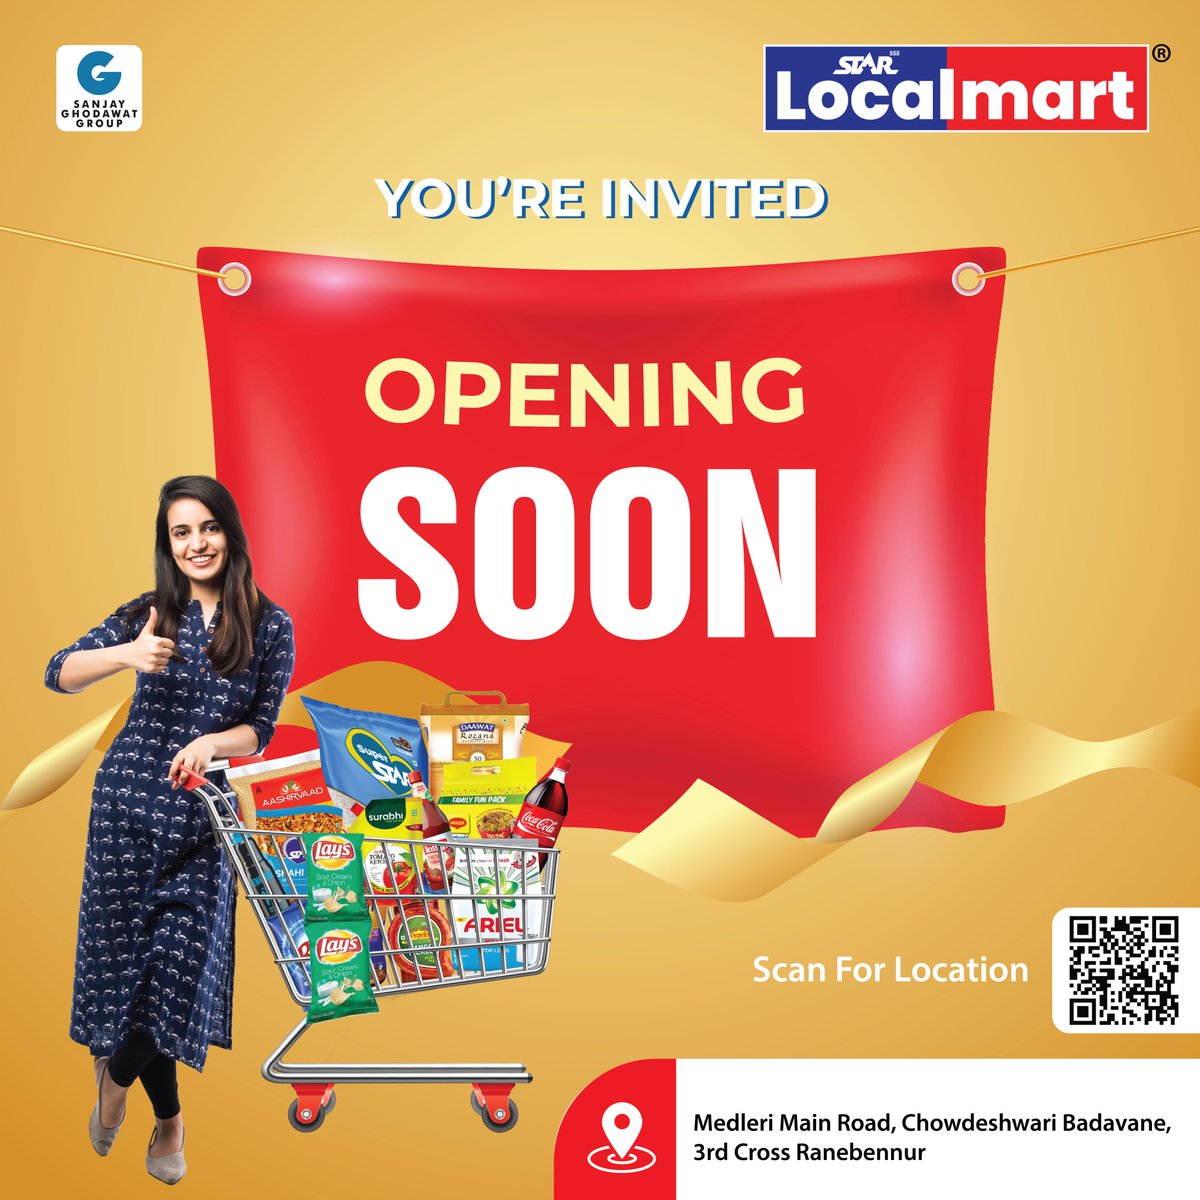 🌟 Exciting News Alert! 🌟

Get ready to experience something truly special because a new chapter is about to unfold! 🎉 We're thrilled to announce that our brand new STAR Localmart Supermarket is opening soon! 🛍️✨

#NewStoreOpening  #StayTuned #ShoppingExperience #ghodawatgroup